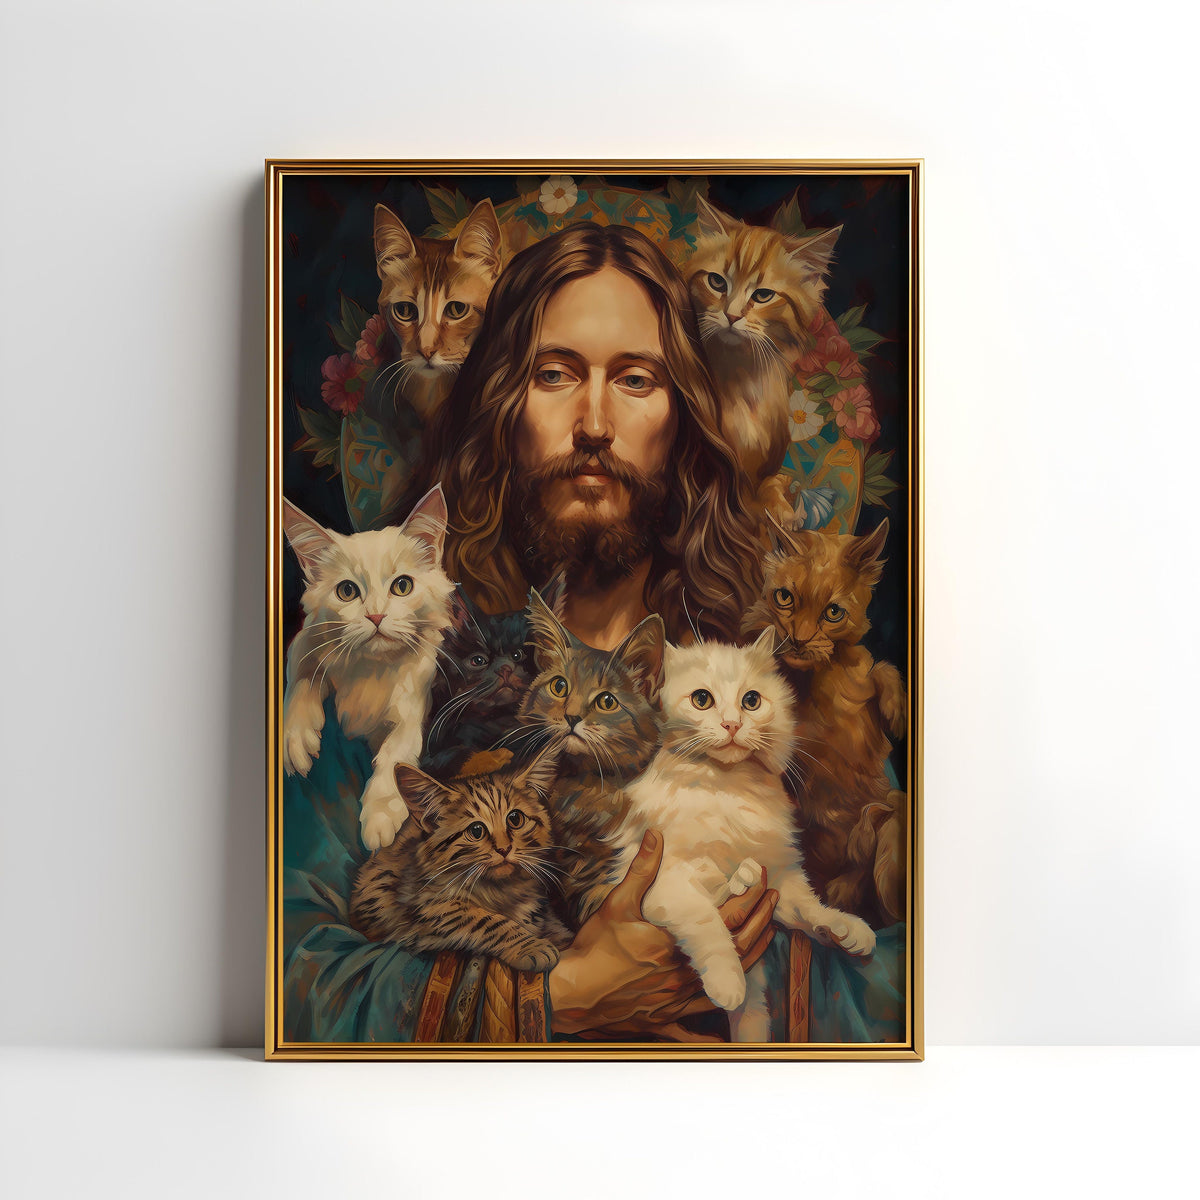 a painting of jesus surrounded by cats